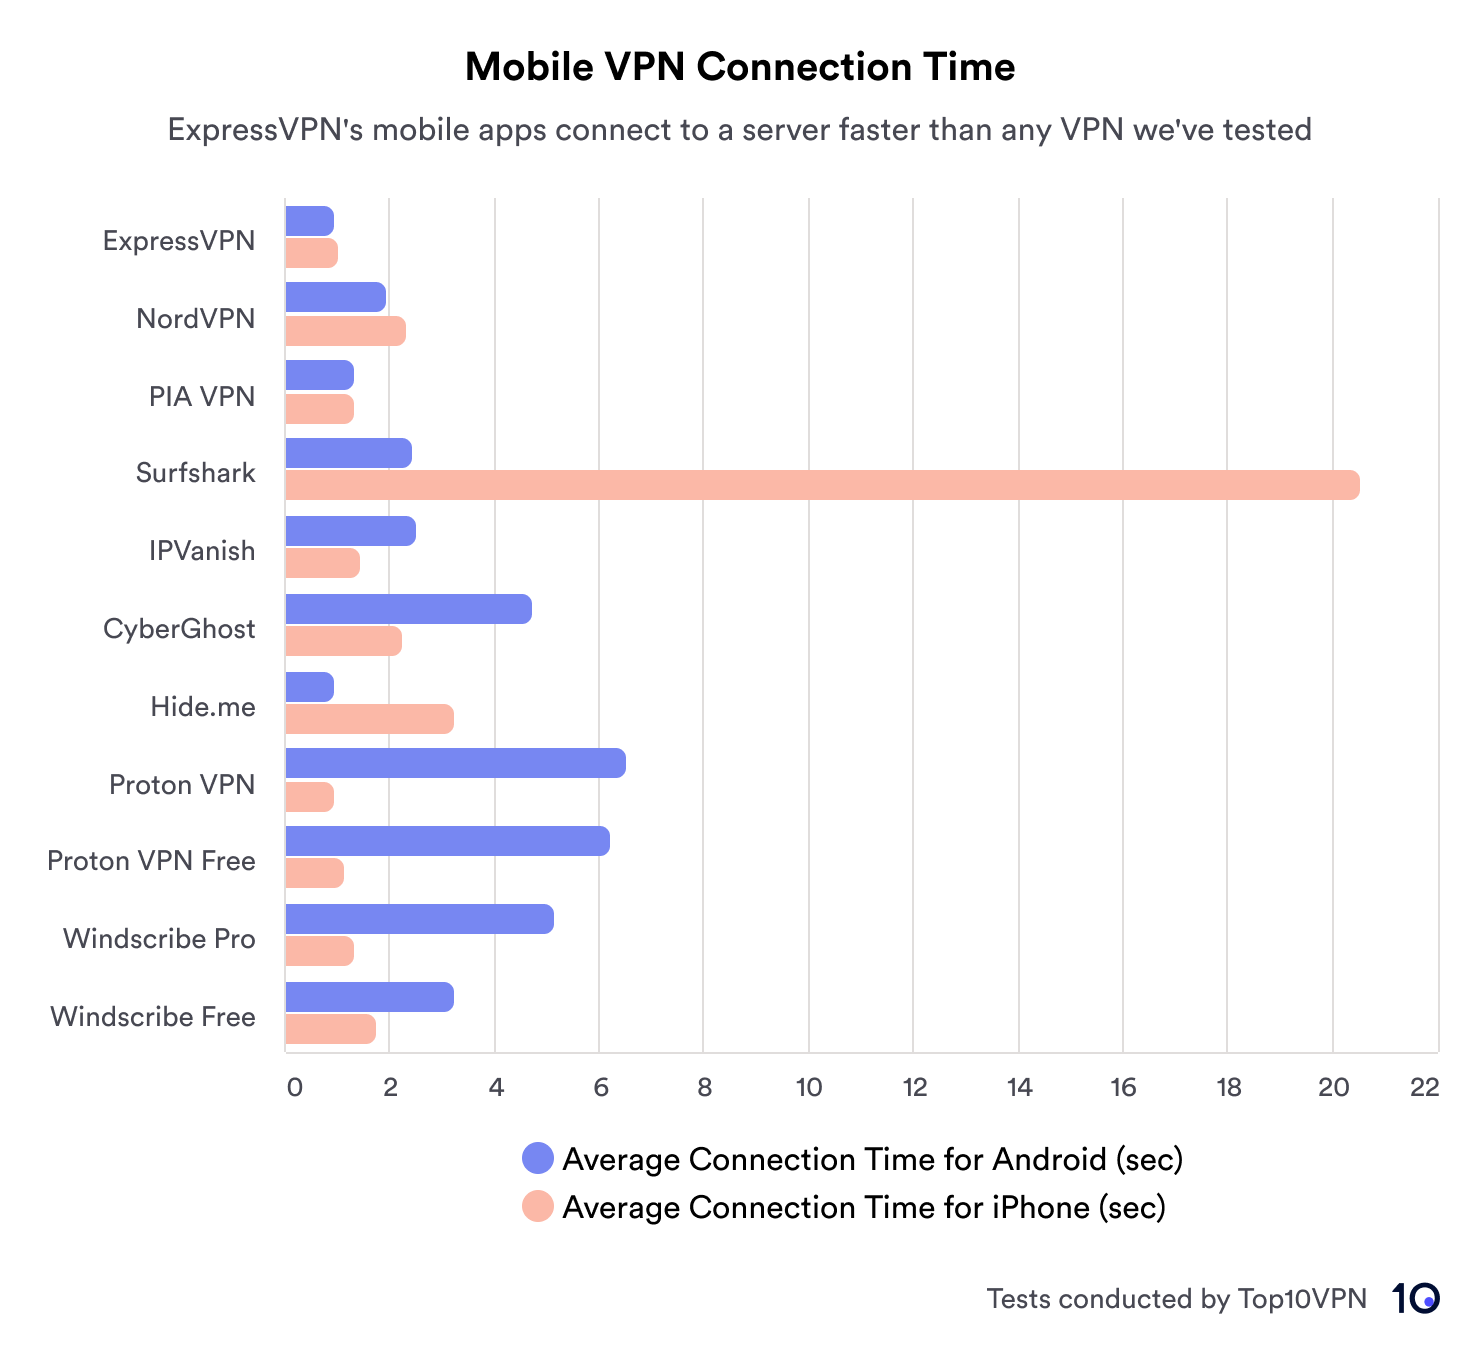 A bar chart comparing the connection times of popular mobile VPNs with ExpressVPN performing best and Surfshark taking the longest